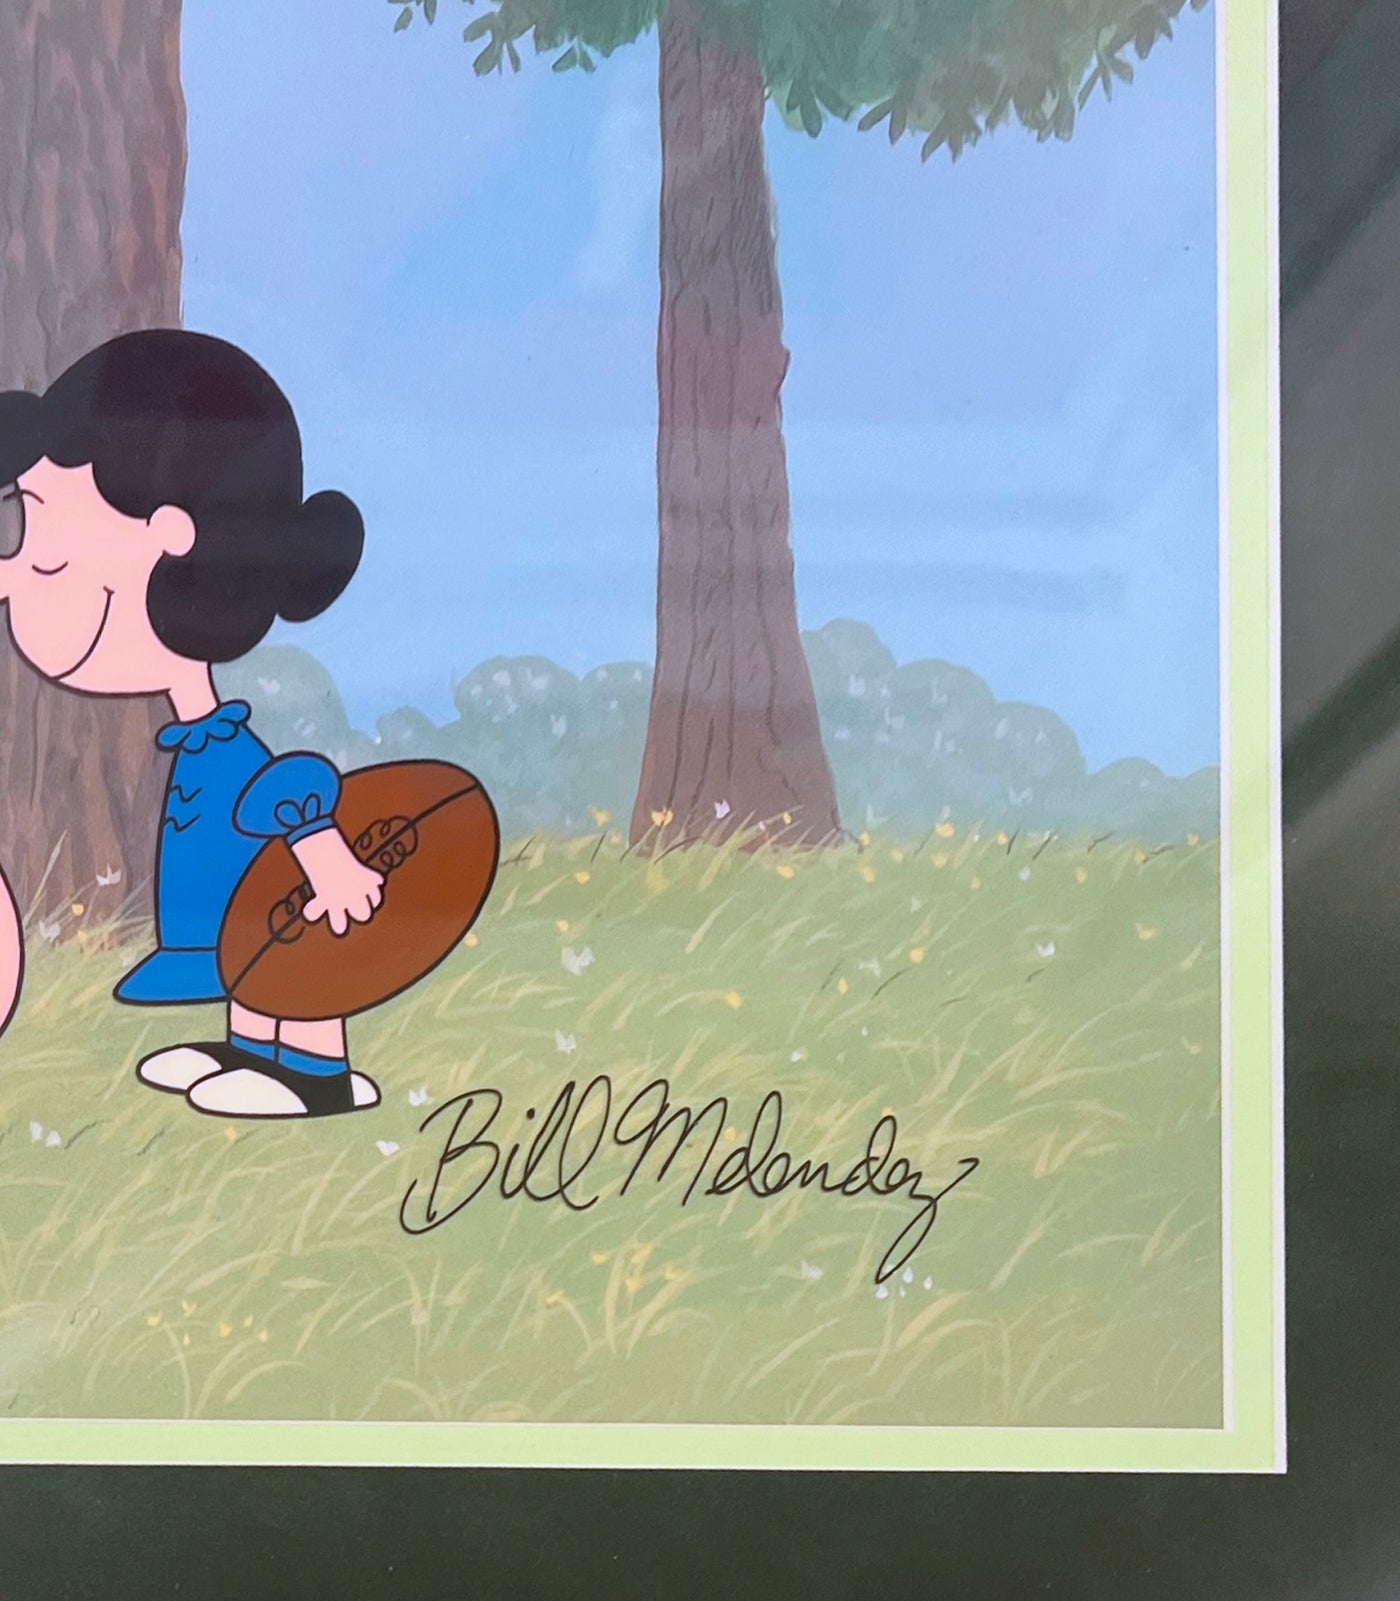 Original Peanuts Limited Edition Cel "Trust Me, Charlie Brown" featuring Charlie Brown and Lucy